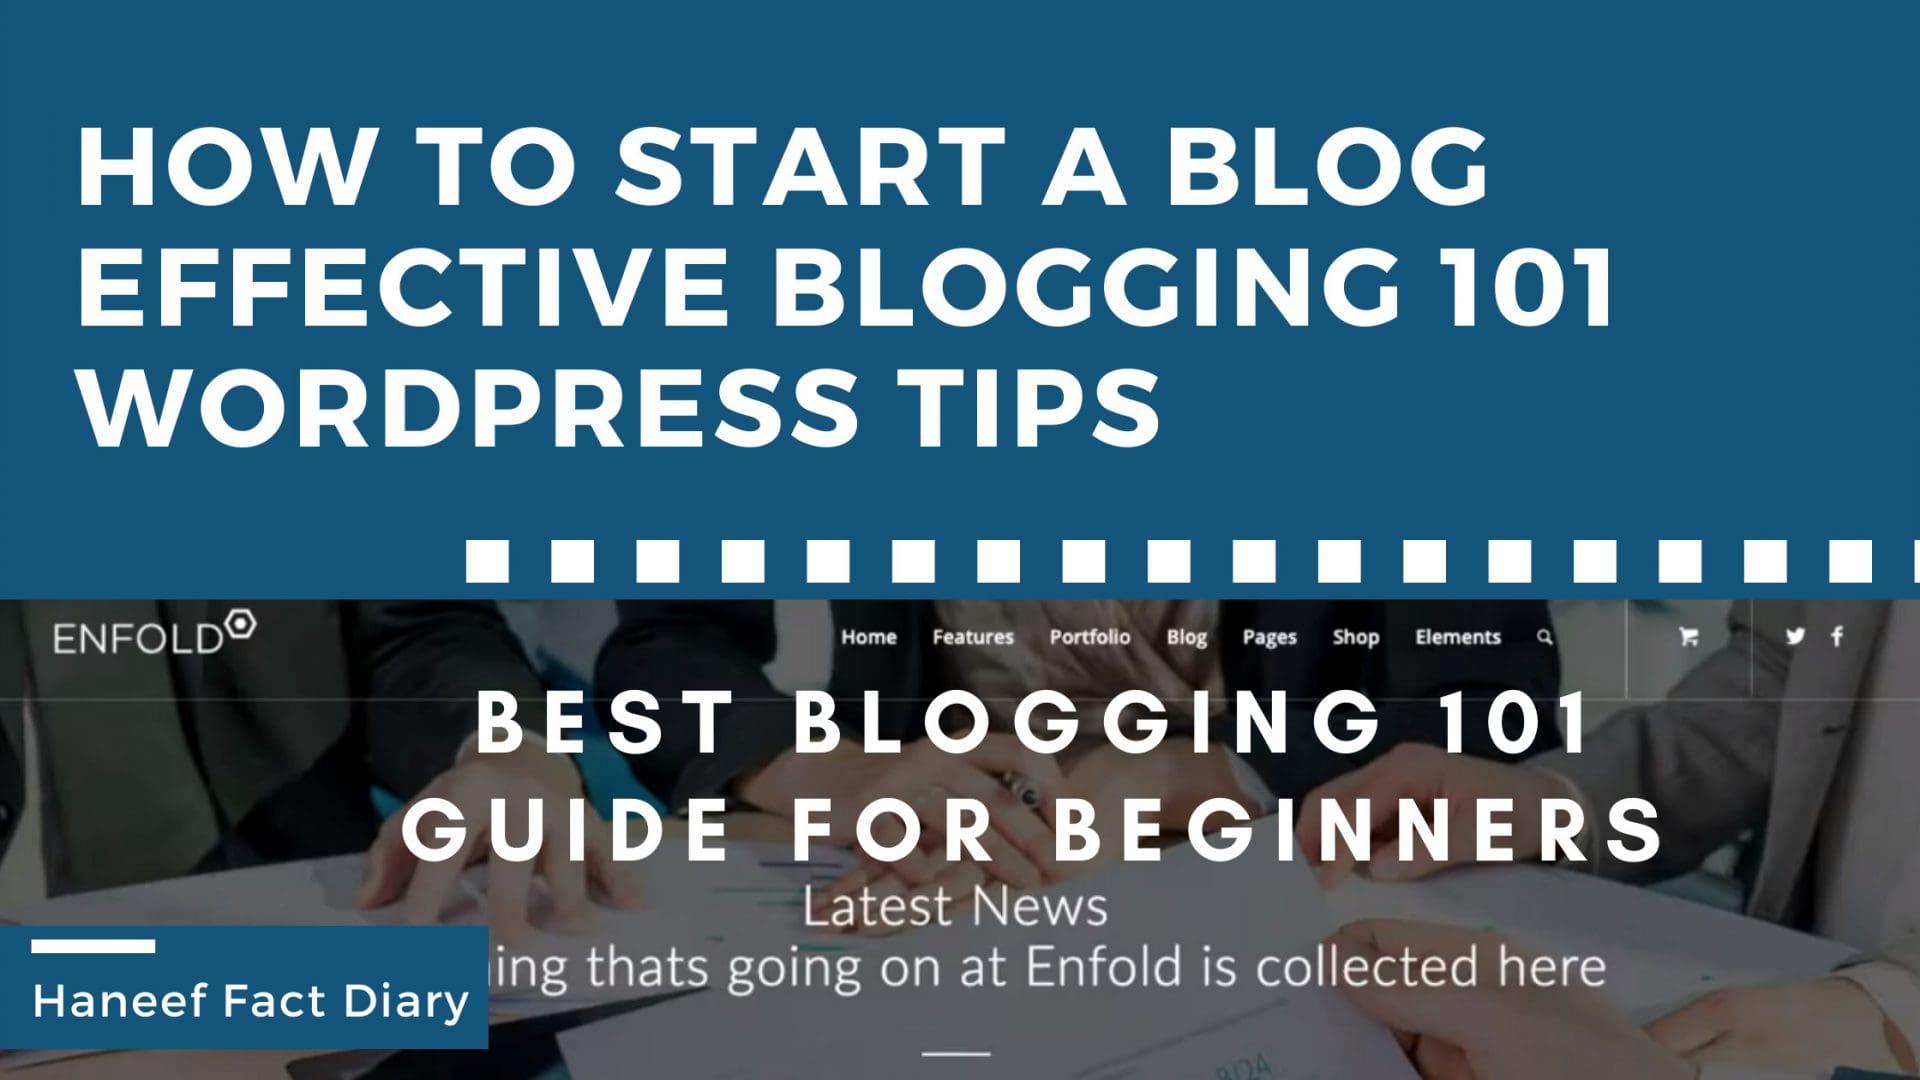 How To Start A Blog In 2022 - Effective blogging 101 WordPress Tips